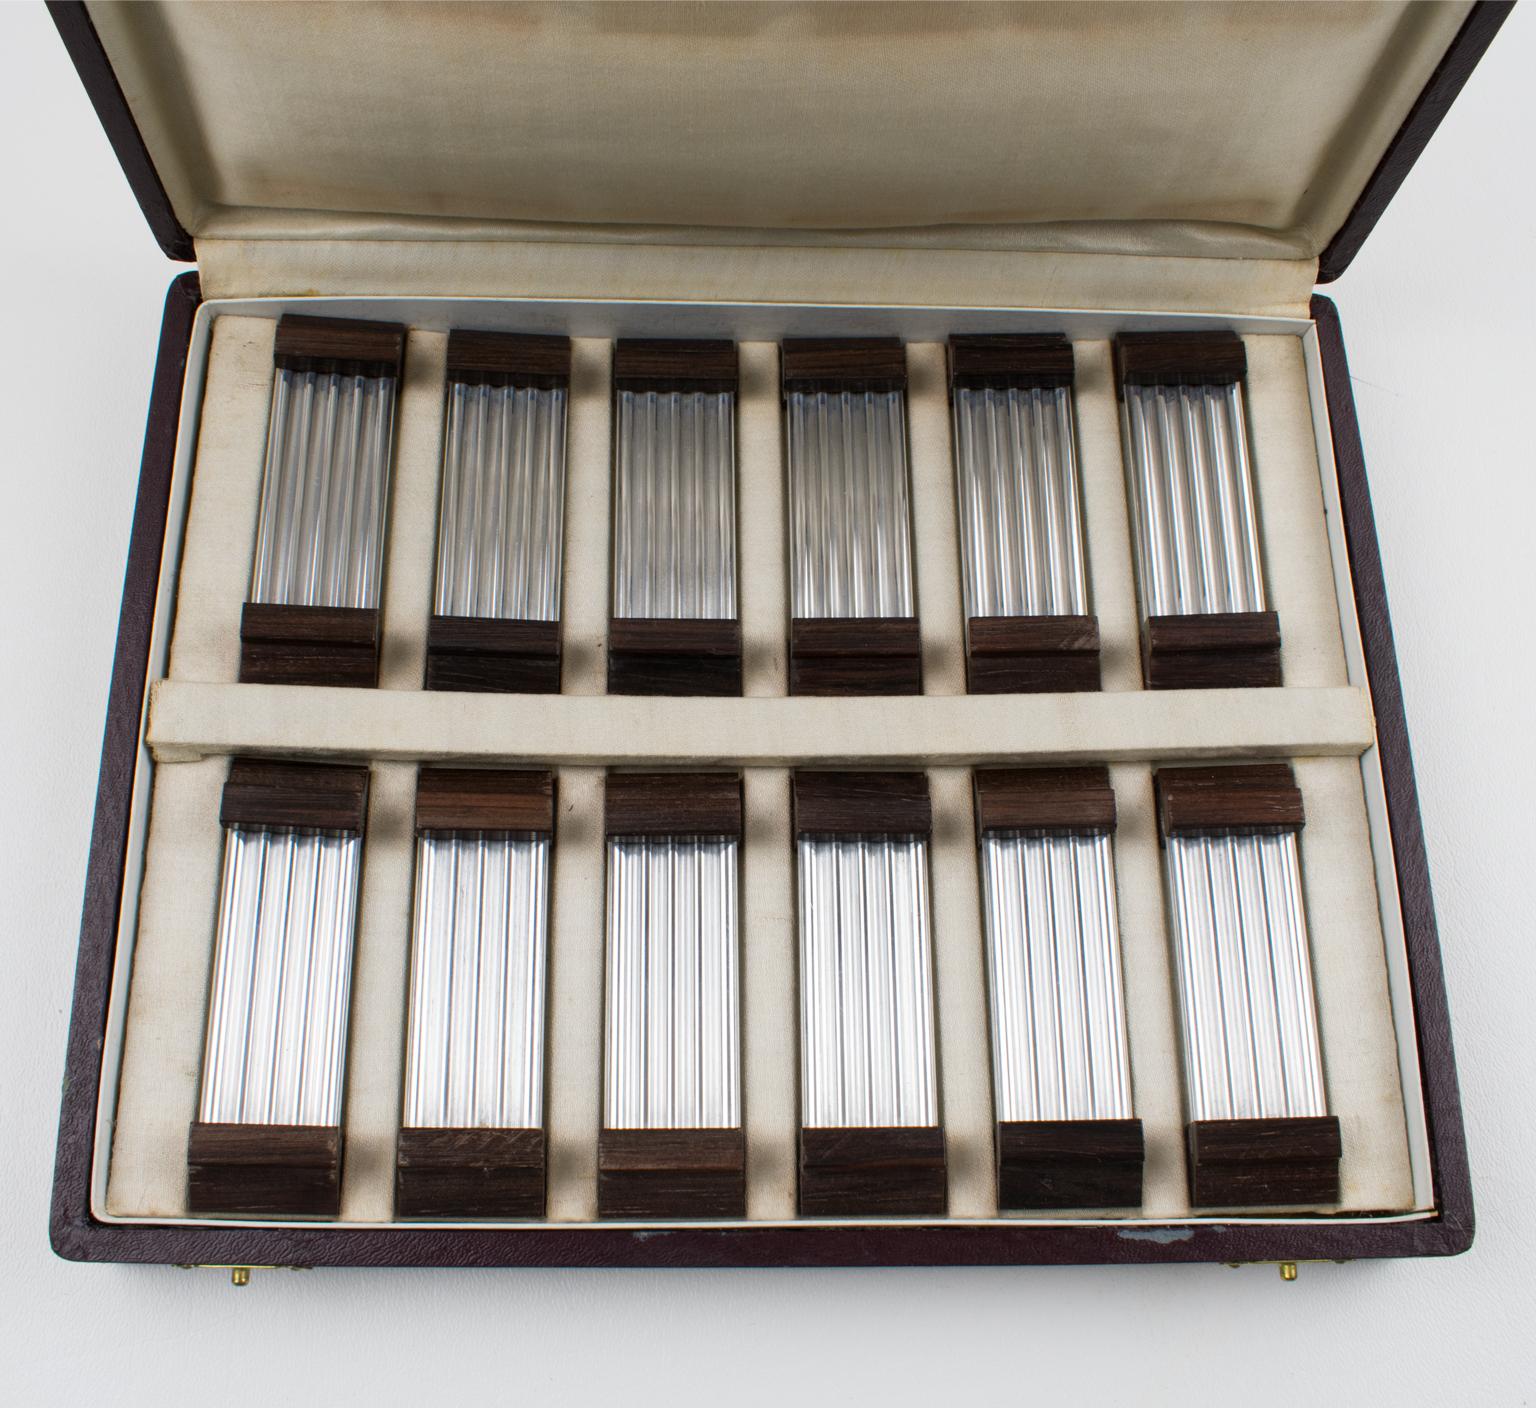 Art Deco Aluminum and Macassar Wood Chopstick Knife Rests, 12 pc in box In Good Condition For Sale In Atlanta, GA